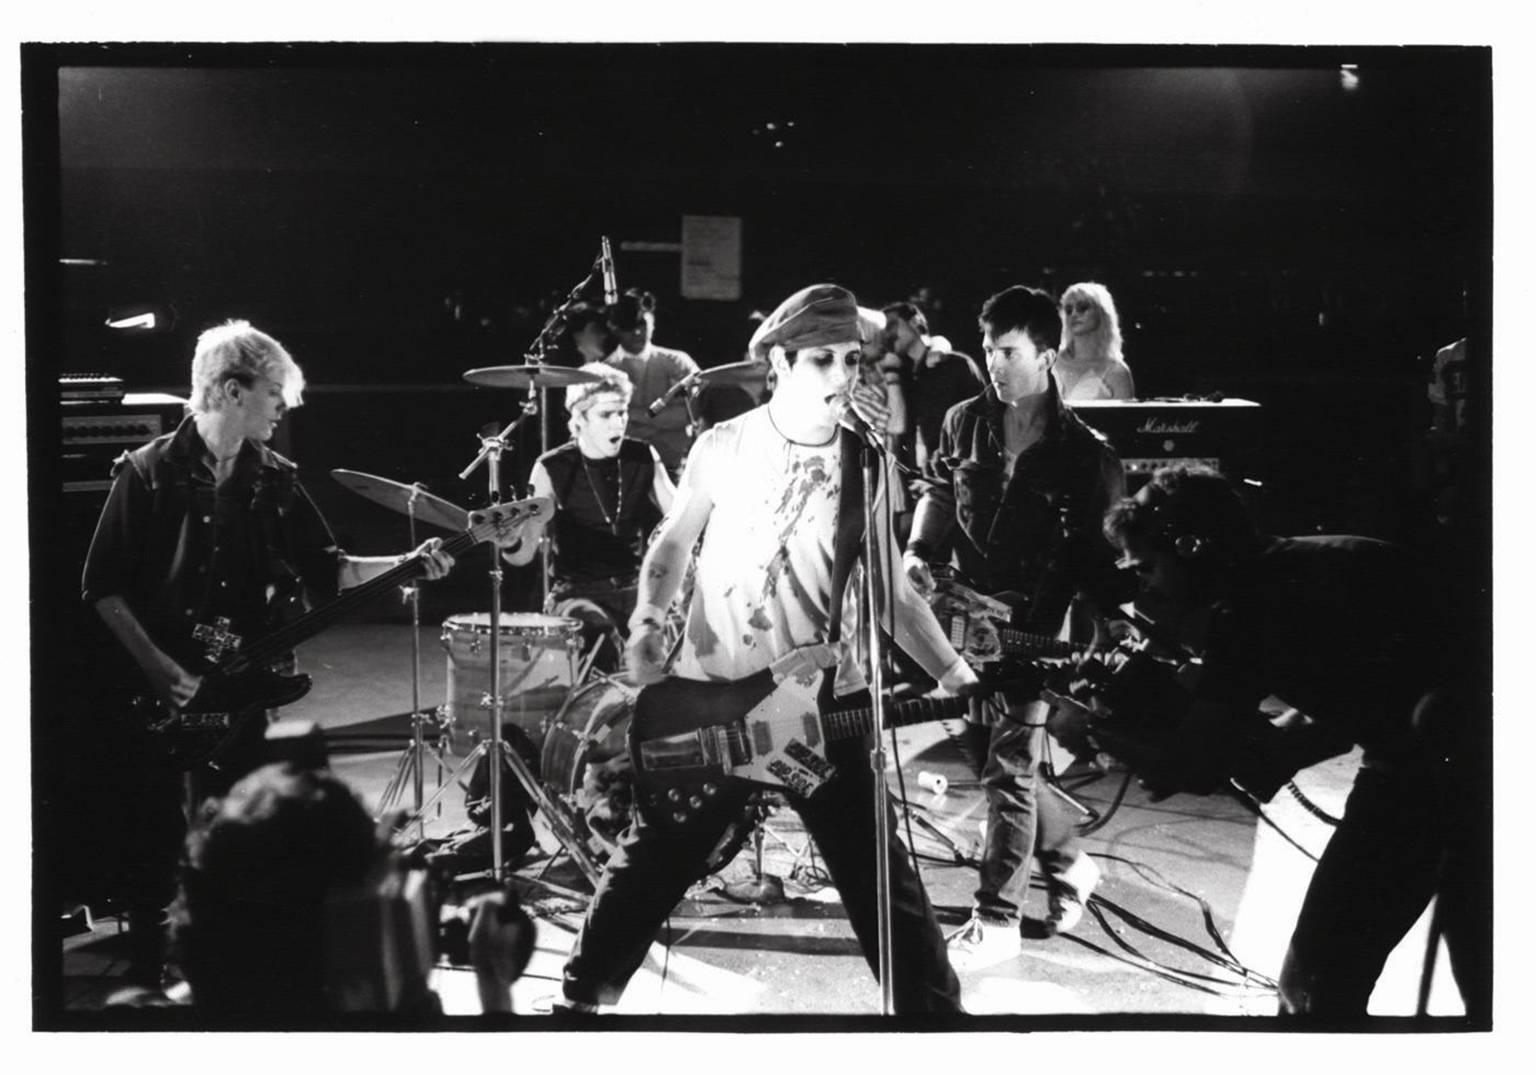 Edward Colver Black and White Photograph - Social Distortion, "Mommy's Little Monster"